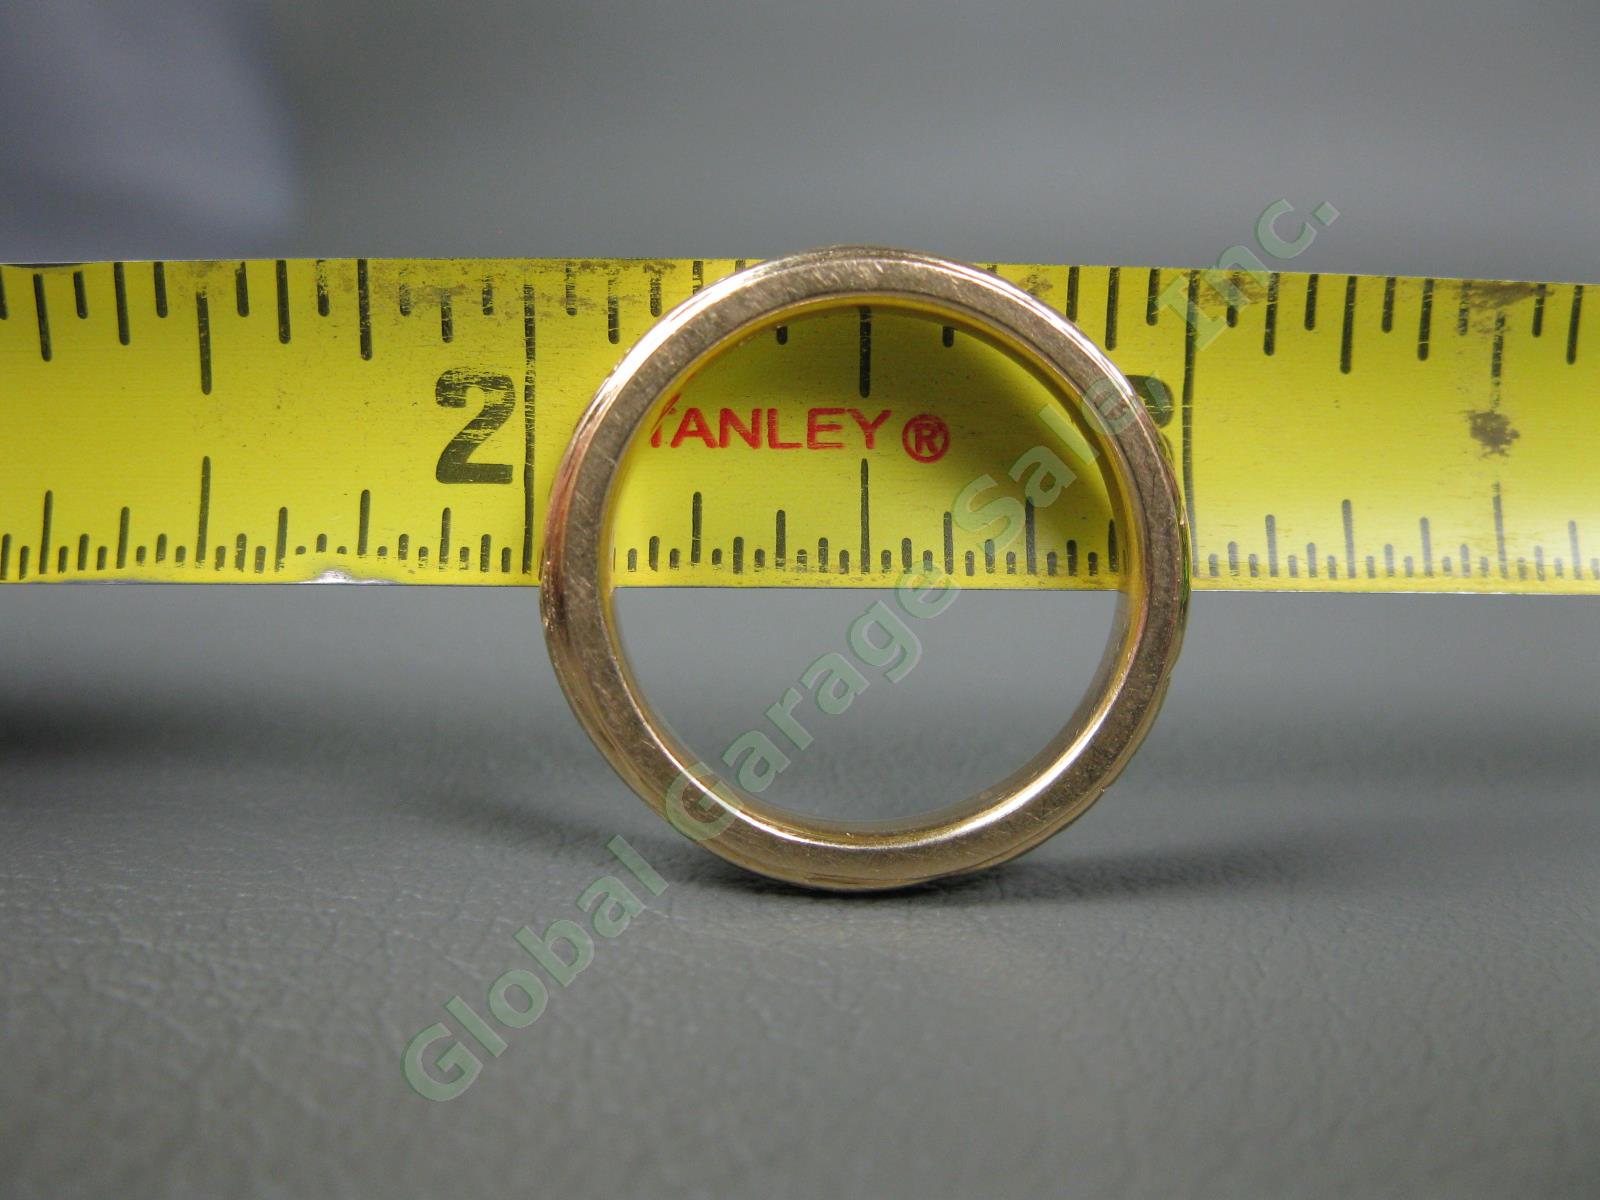 14K Solid Yellow Gold Size 8-3/4 Engraved Mens Gents Wedding Band Ring 6.4 Grams 2